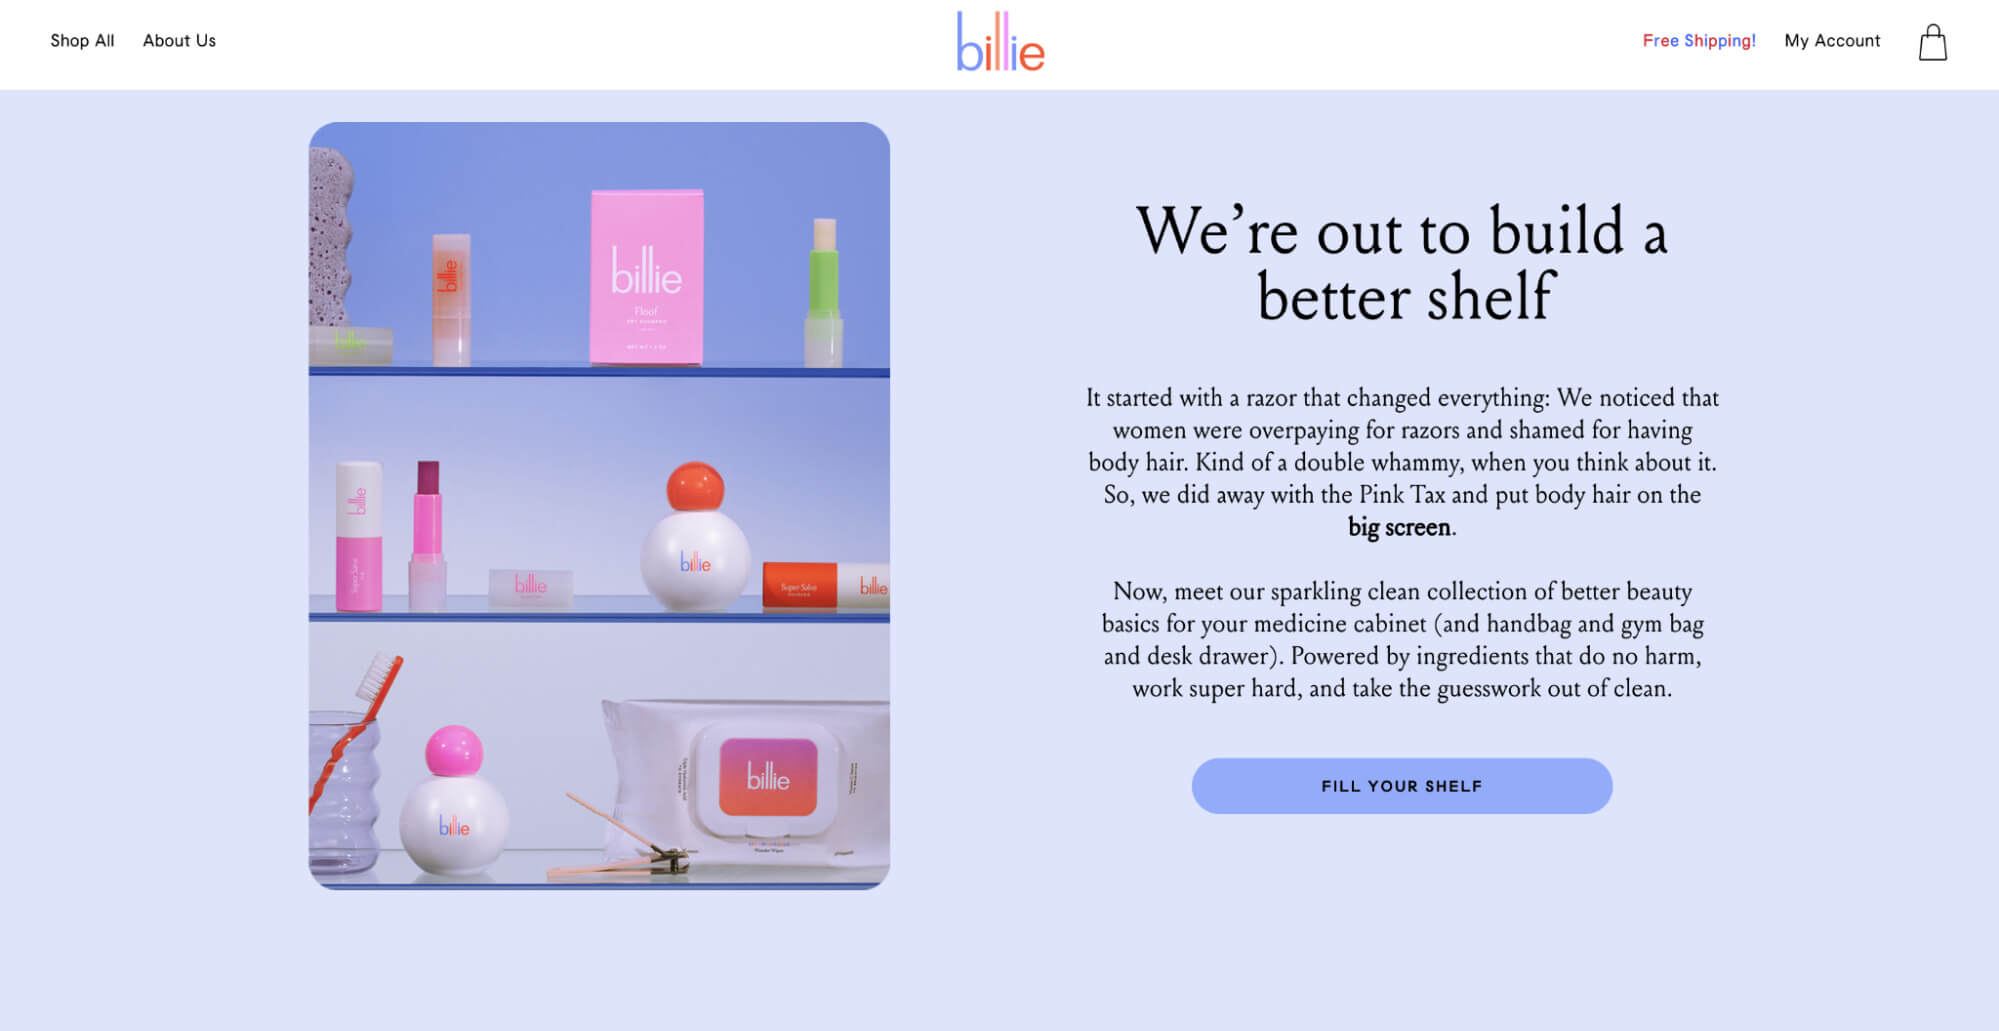 Screenshot of Billies about page sharing their mission statement